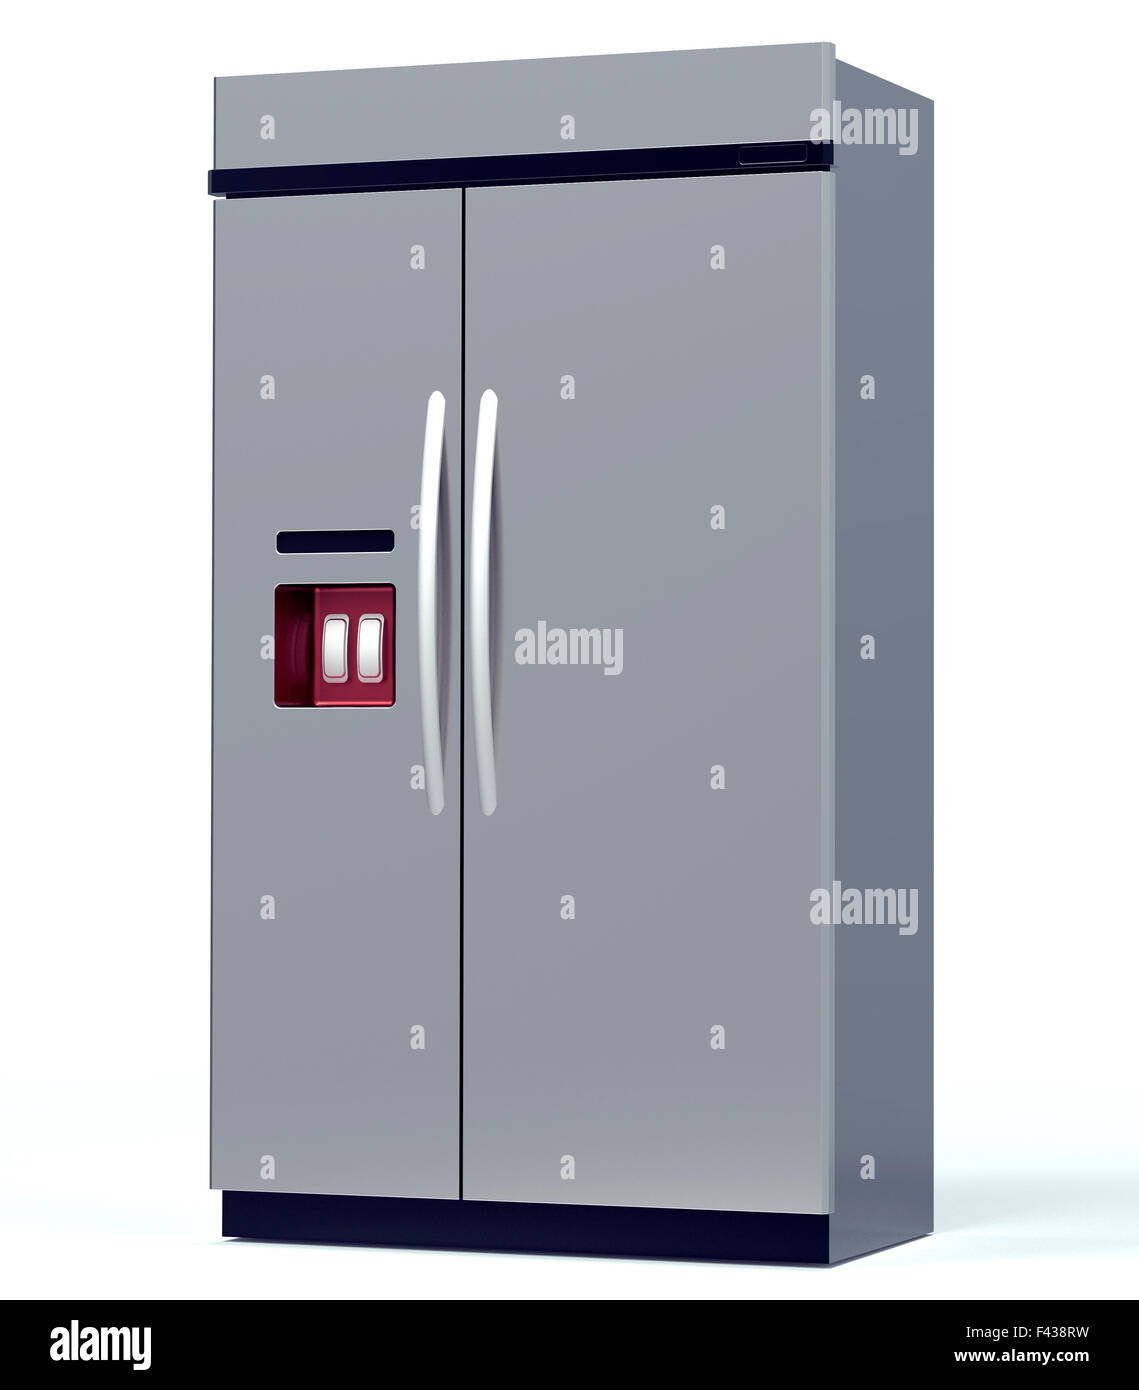 luxury steel refrigerator isolated on white with clipping path Stock Photo